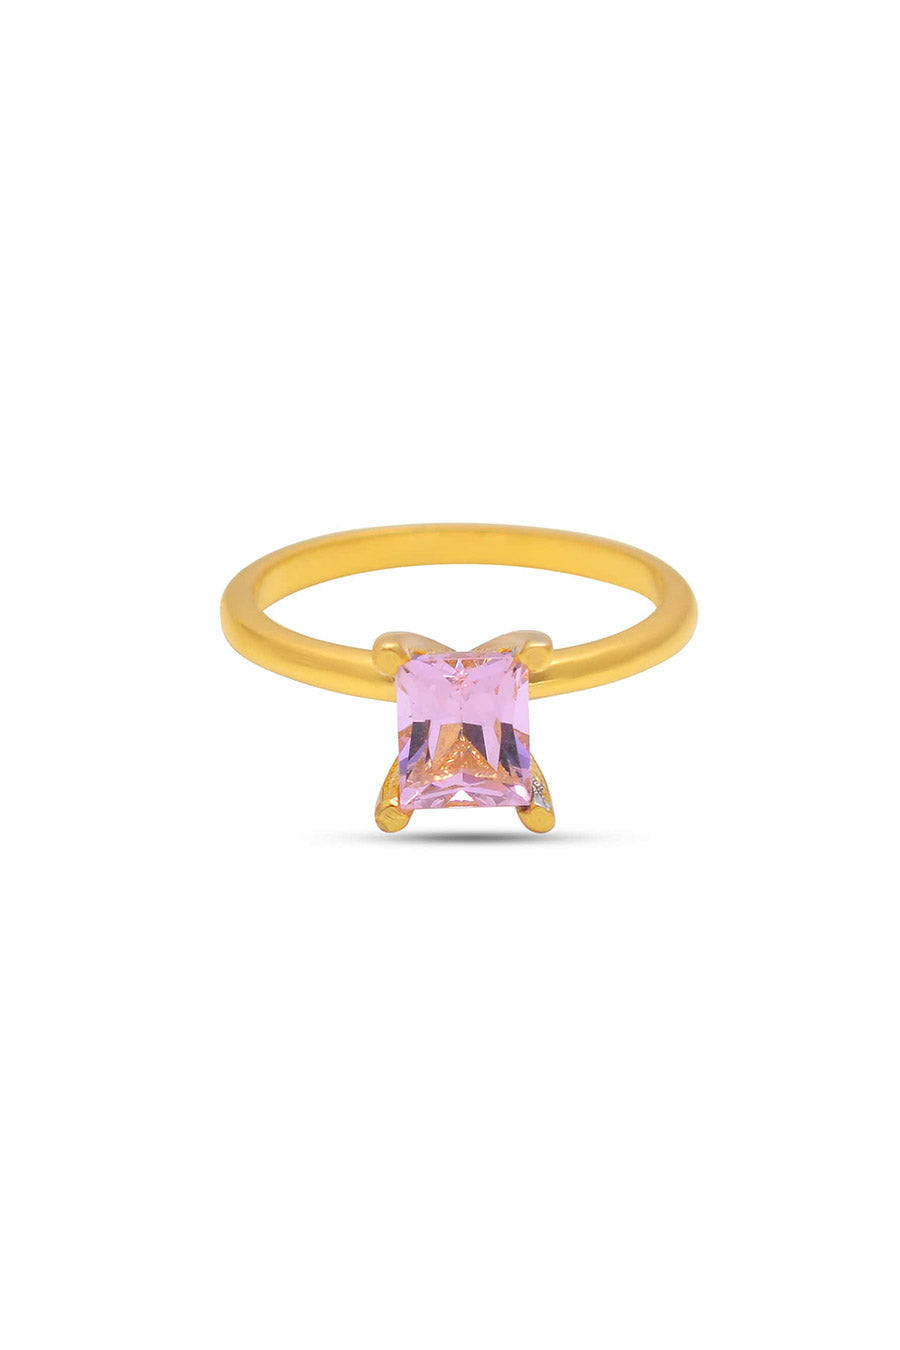 Morganite Octagon Solitaire Ring in 925 Silver